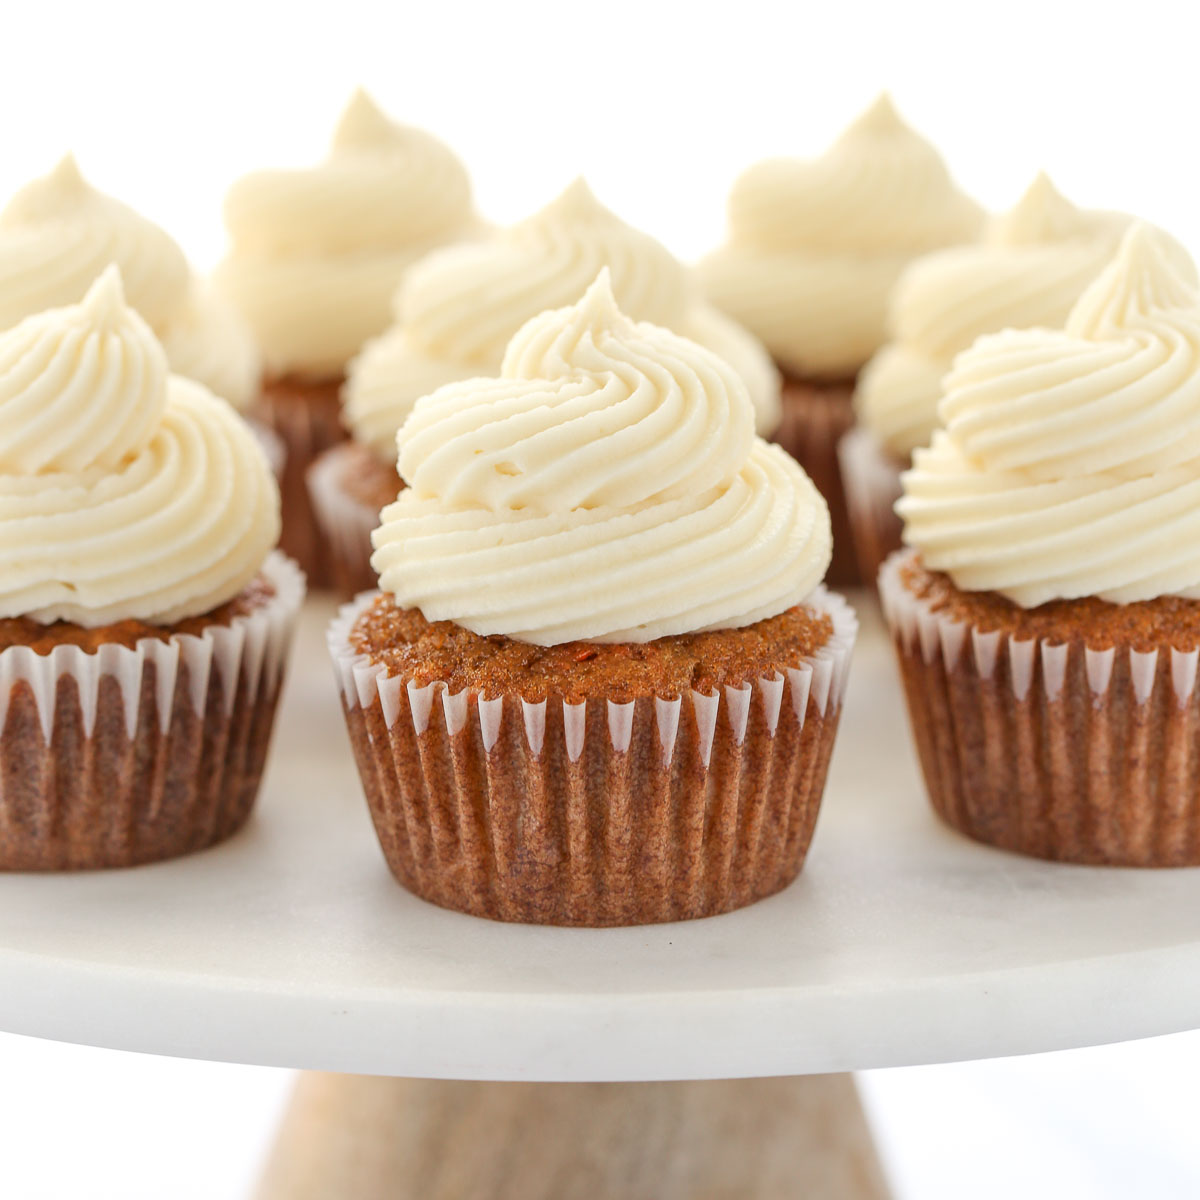 Carrot Cake Cupcakes w/ Brown Sugar Frosting +VIDEO | Lil' Luna